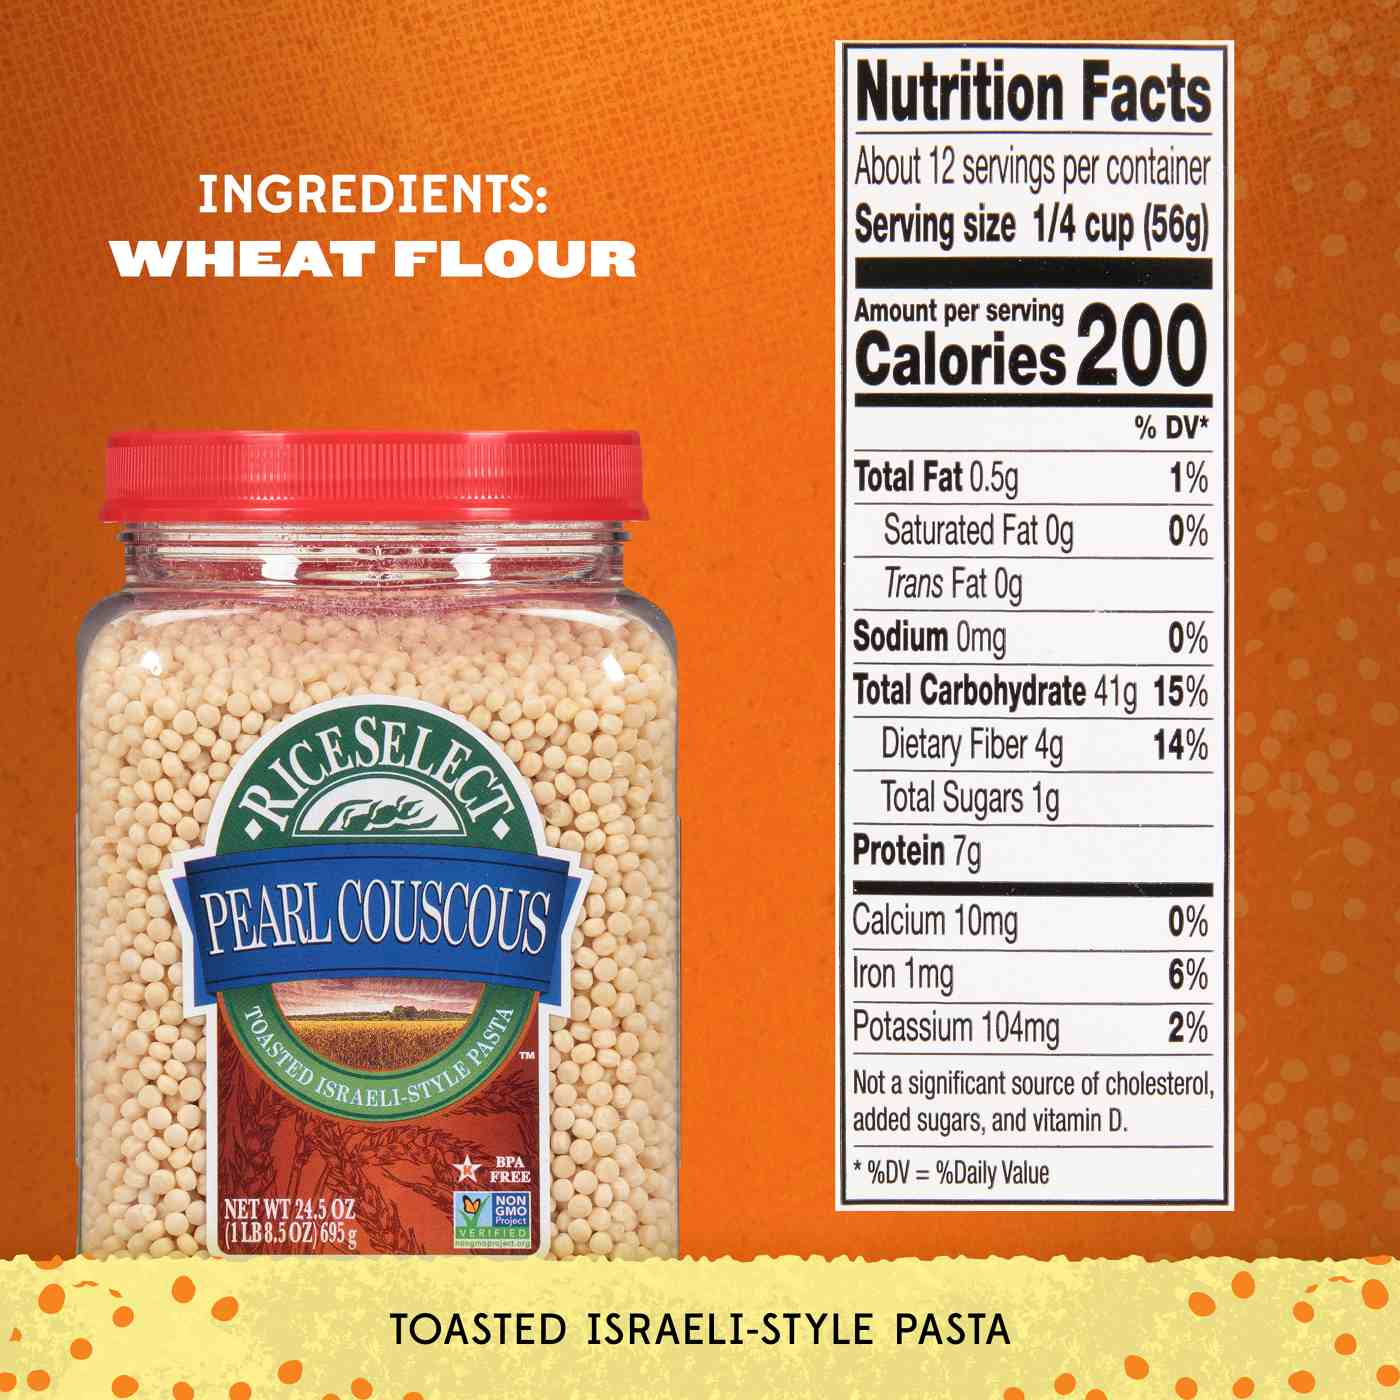 RiceSelect Original Pearl Couscous; image 3 of 6